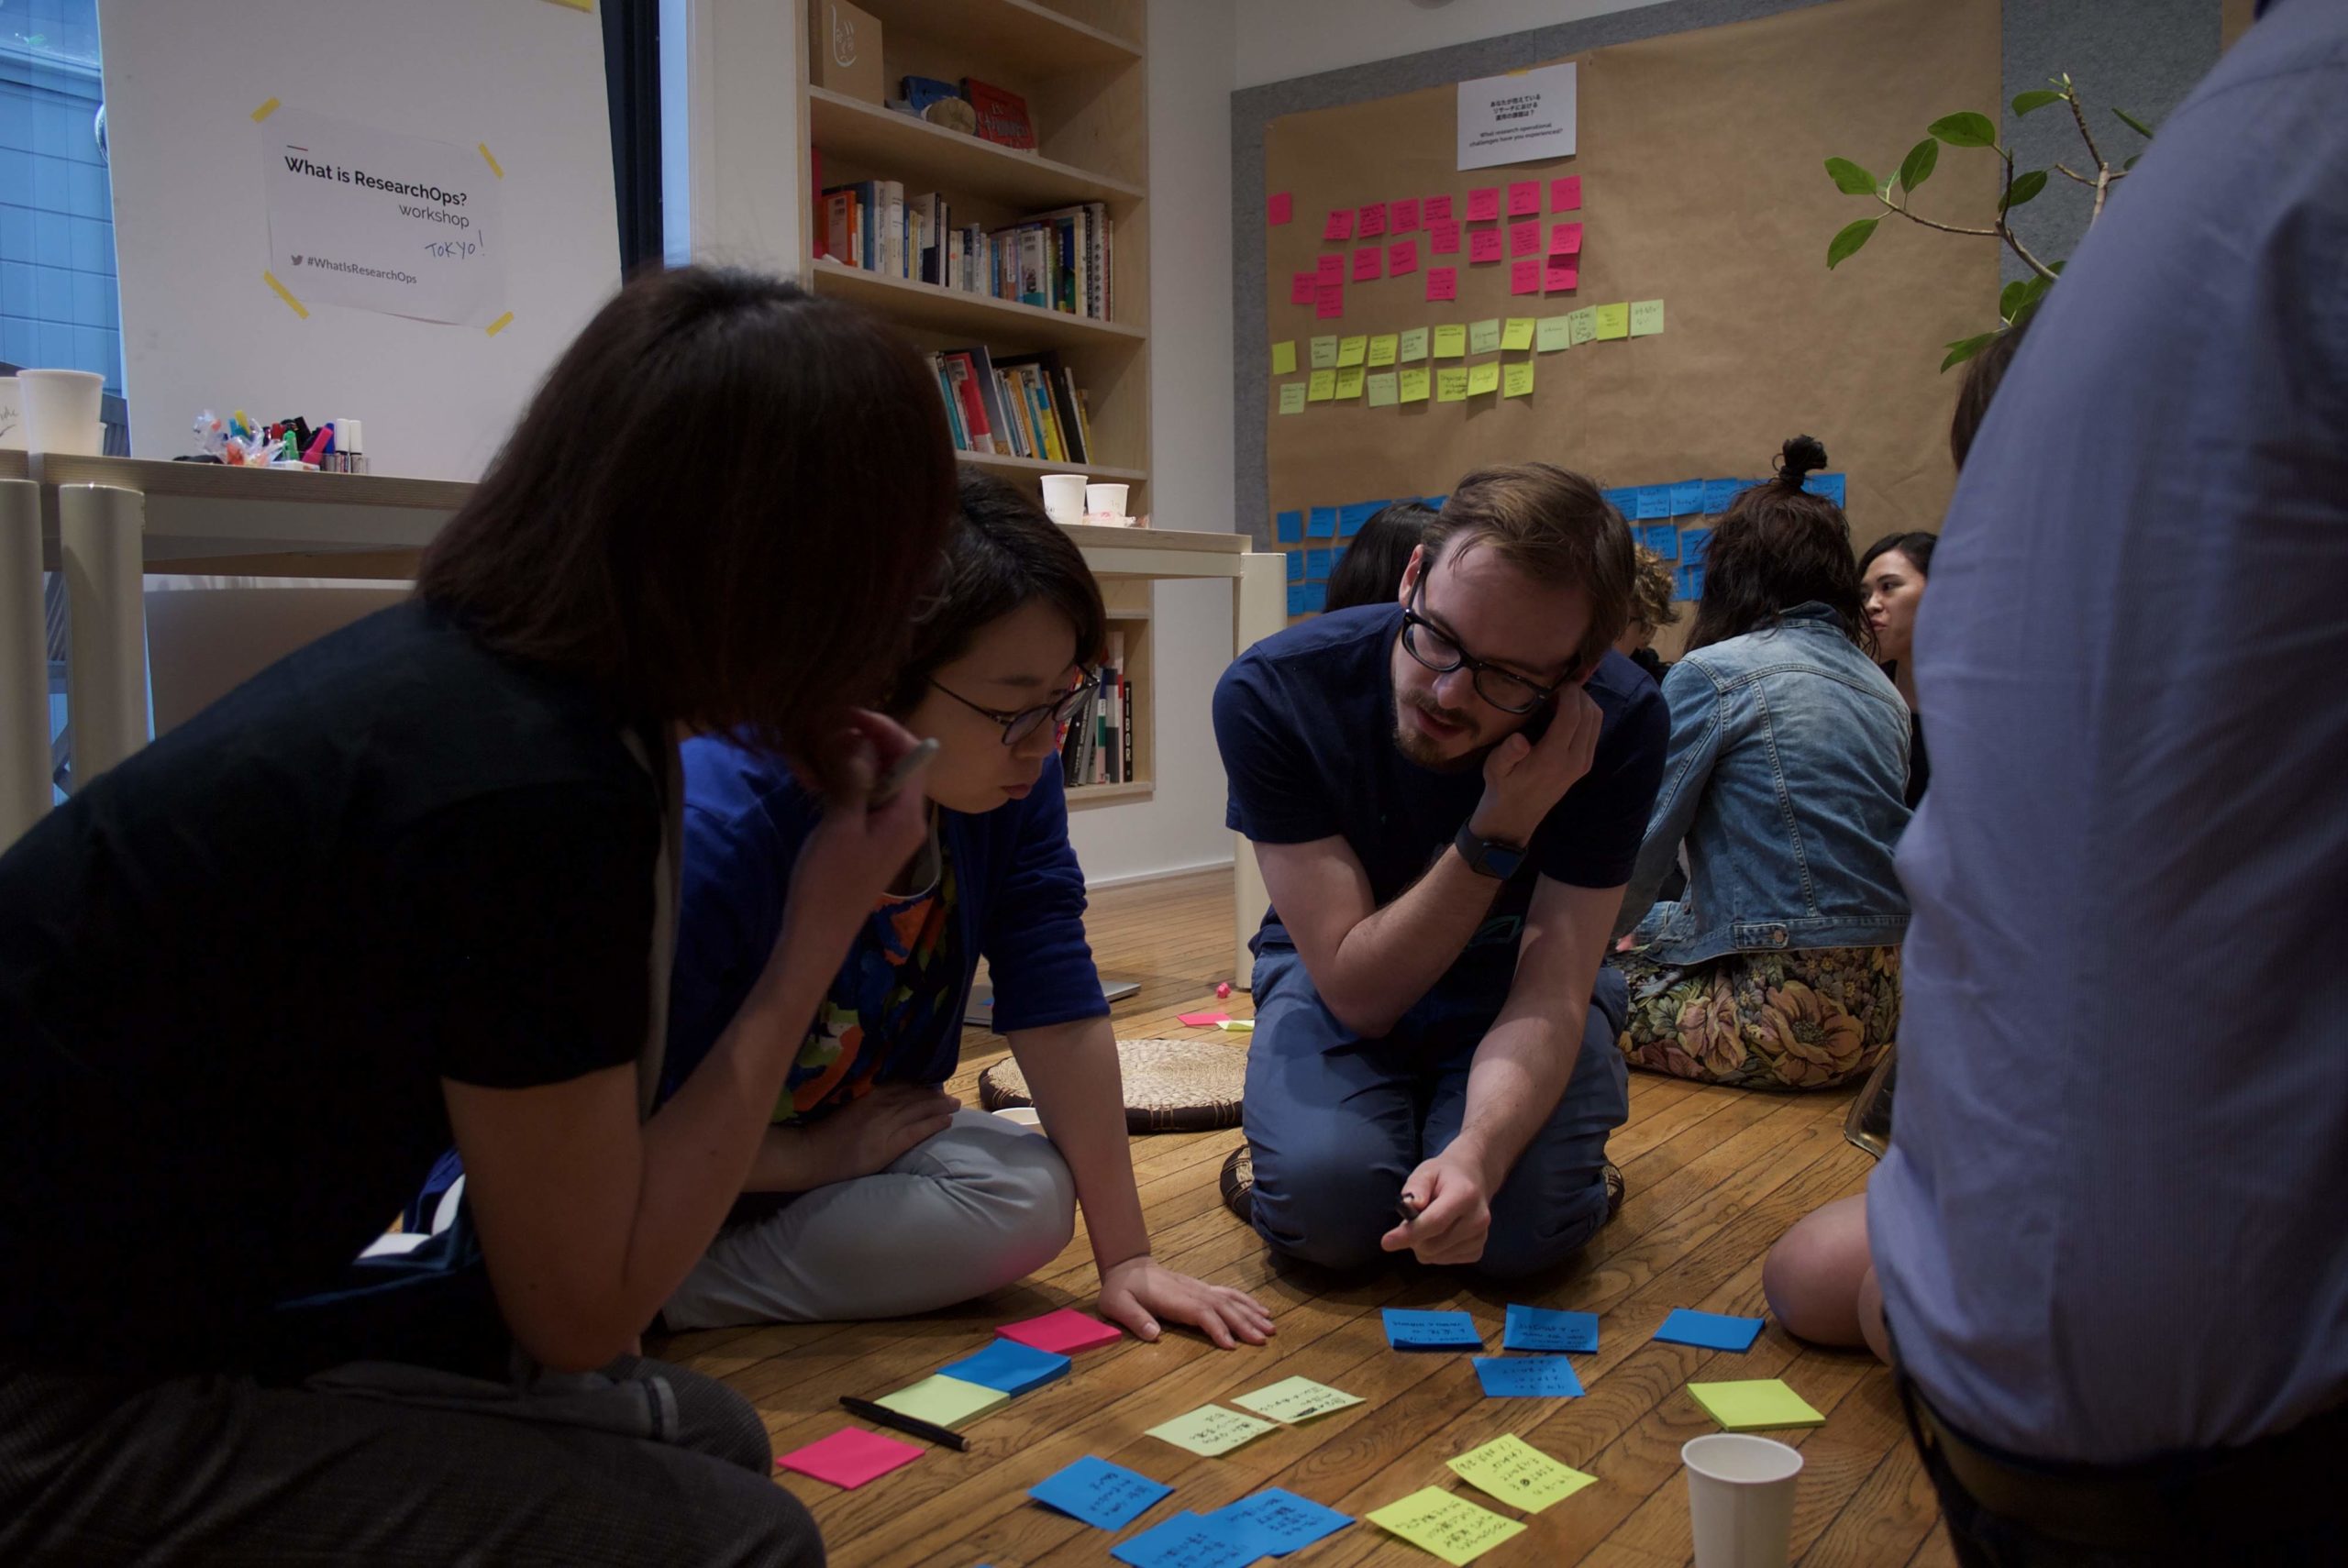 A group of people sitting on the floor looking at post-it notes